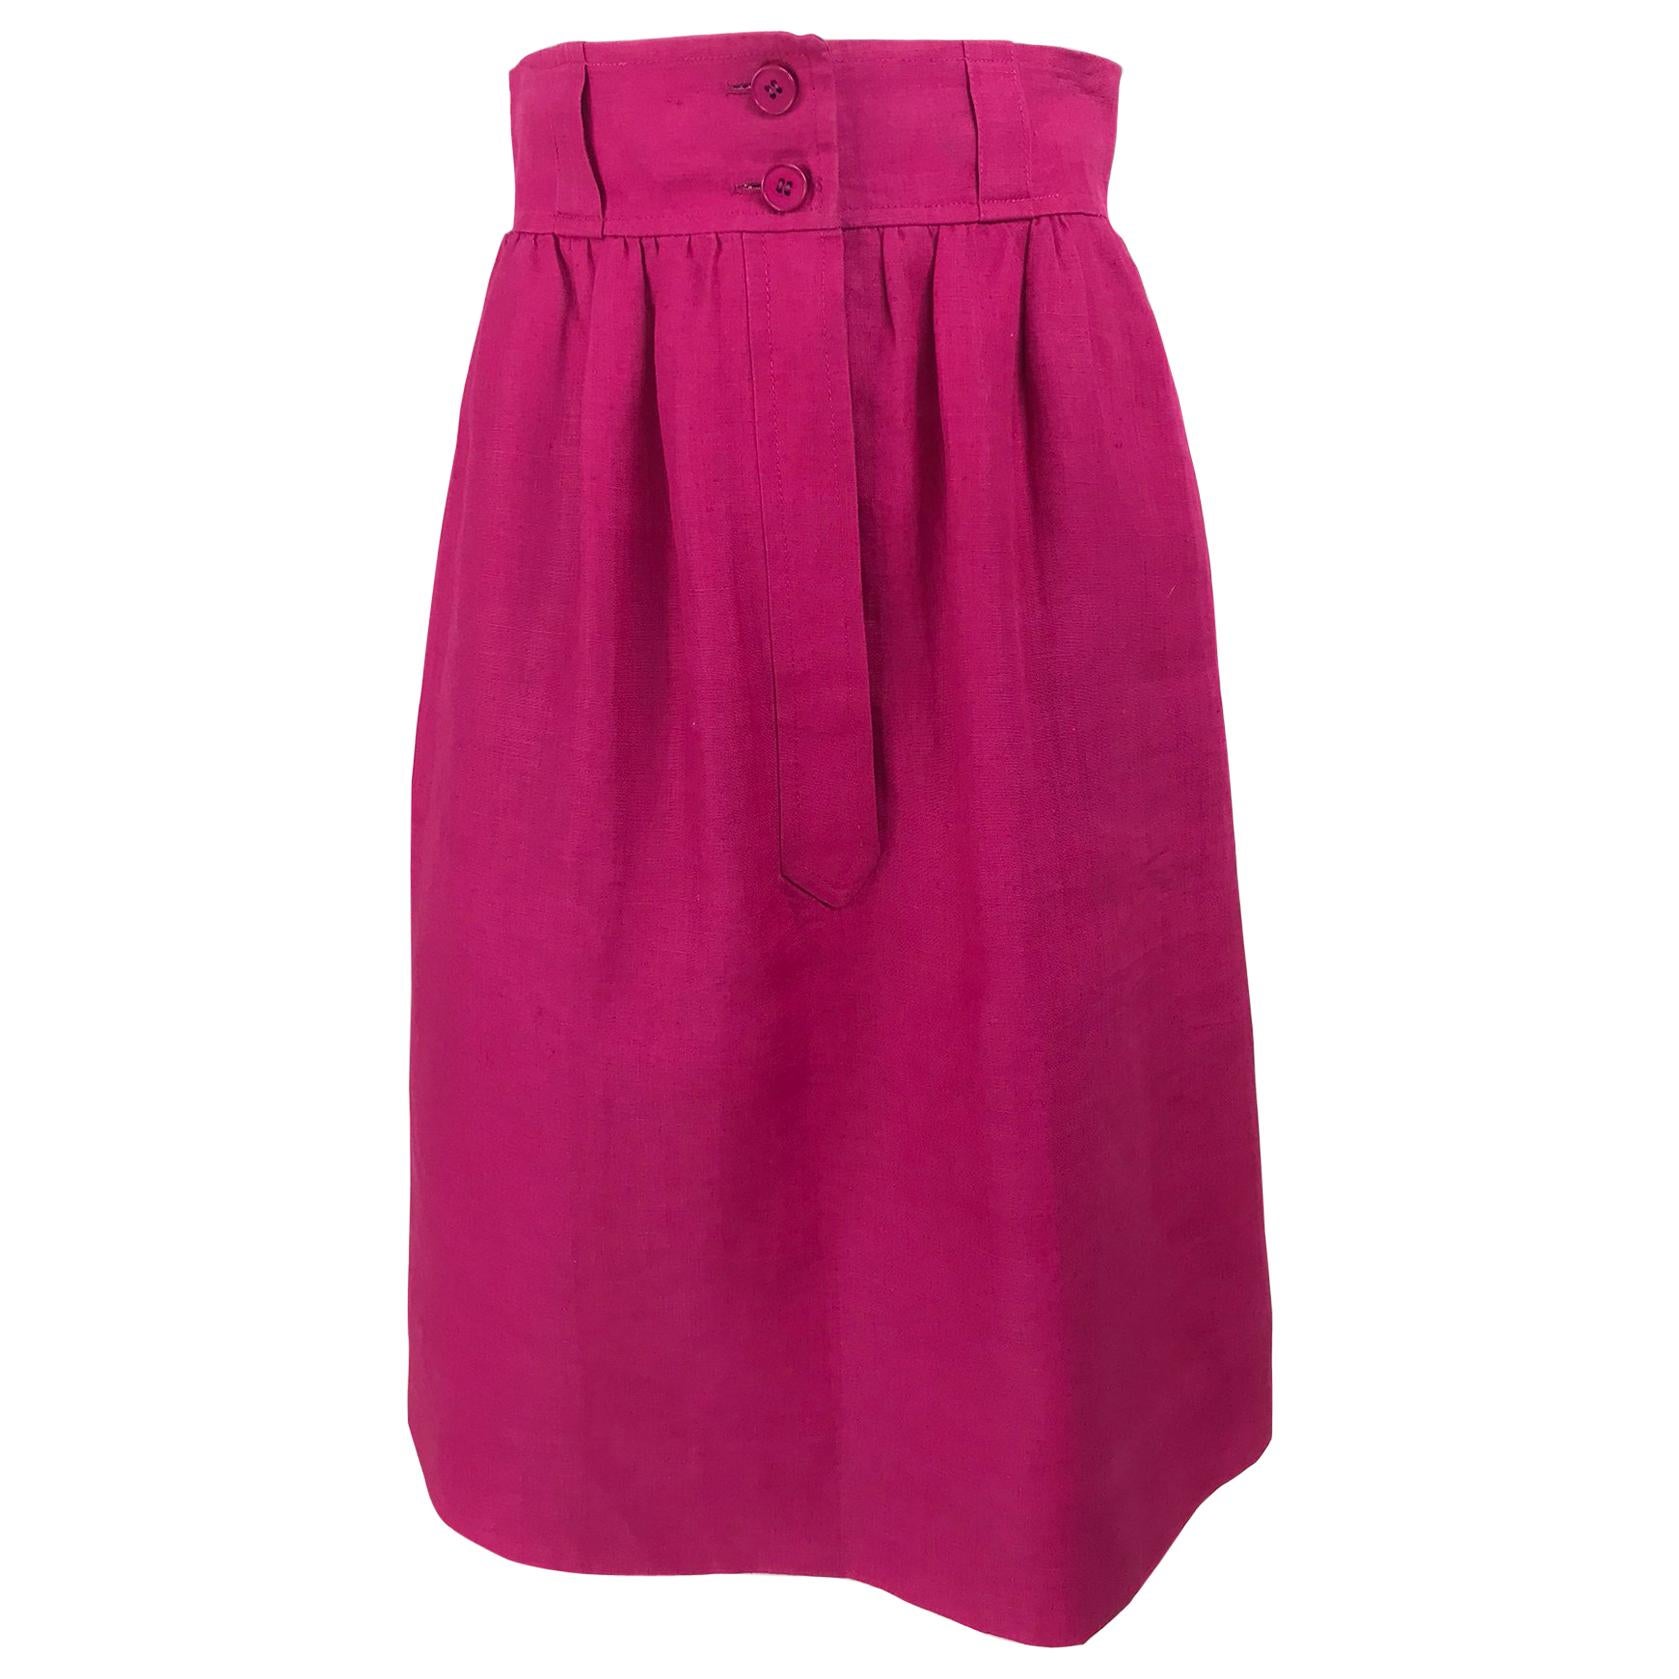 Givenchy Hot Pink Linen Skirt 1980s